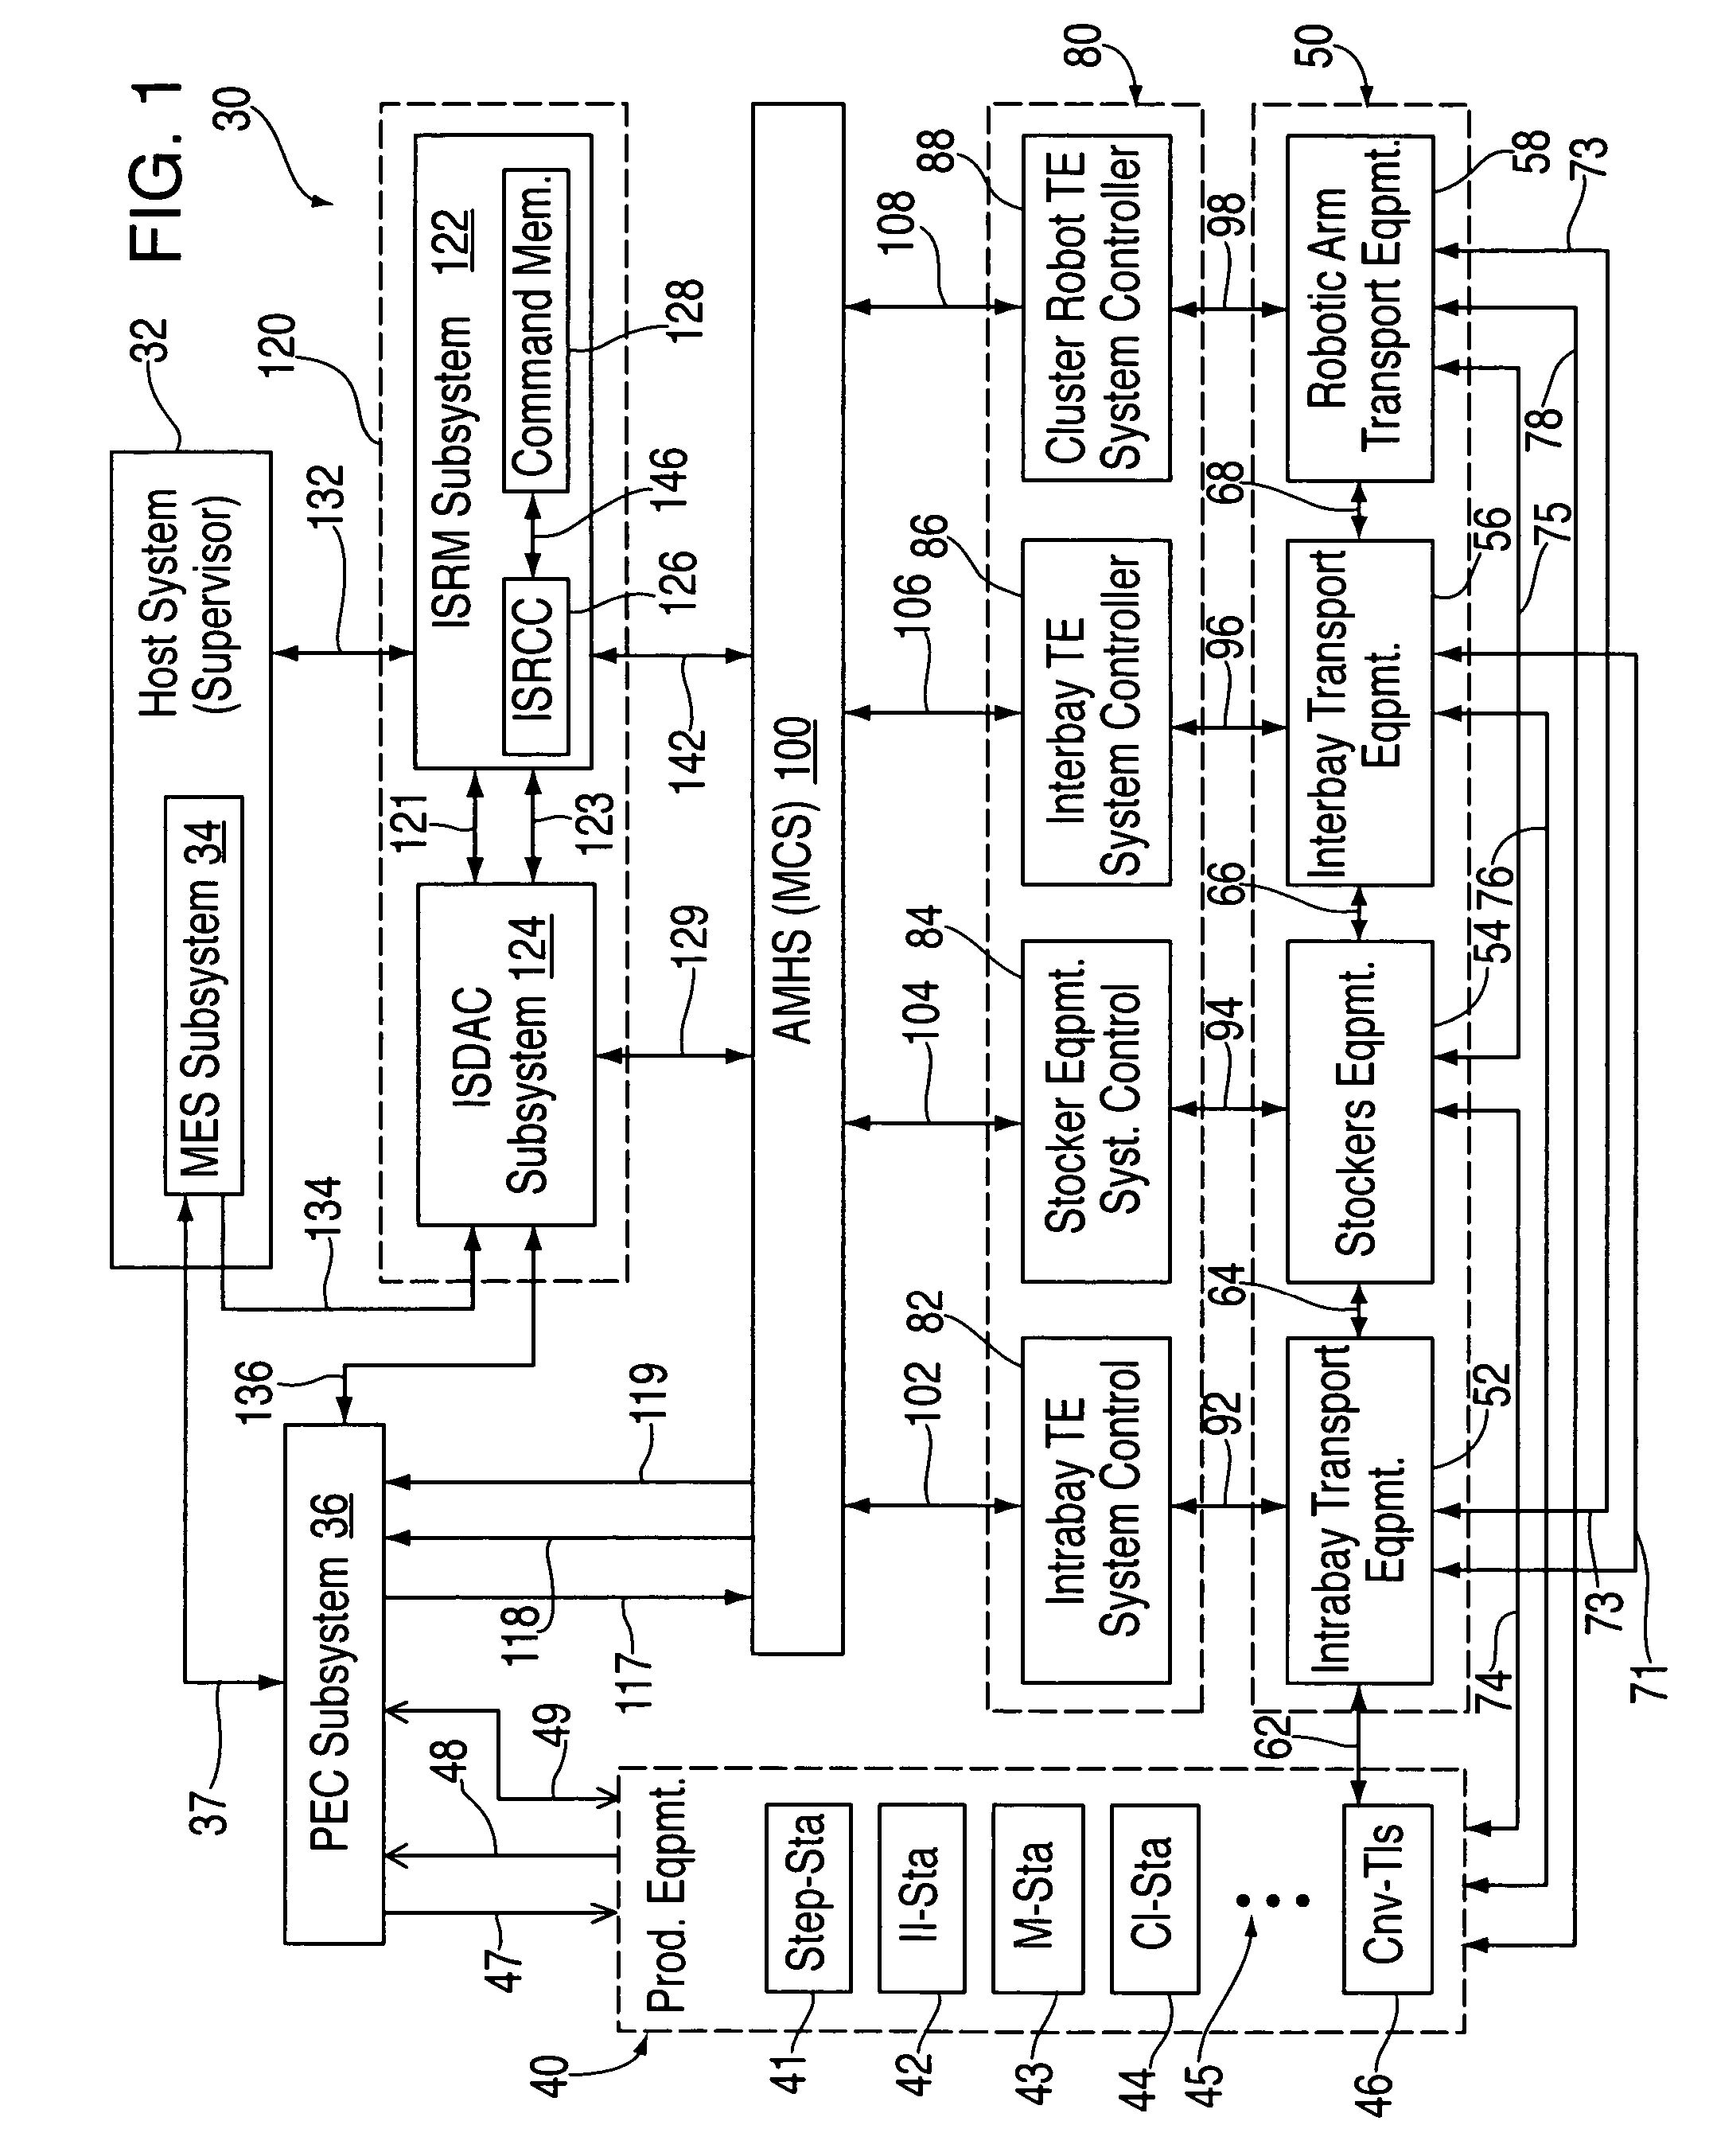 Method and system for automating issue resolution in manufacturing execution and material control systems